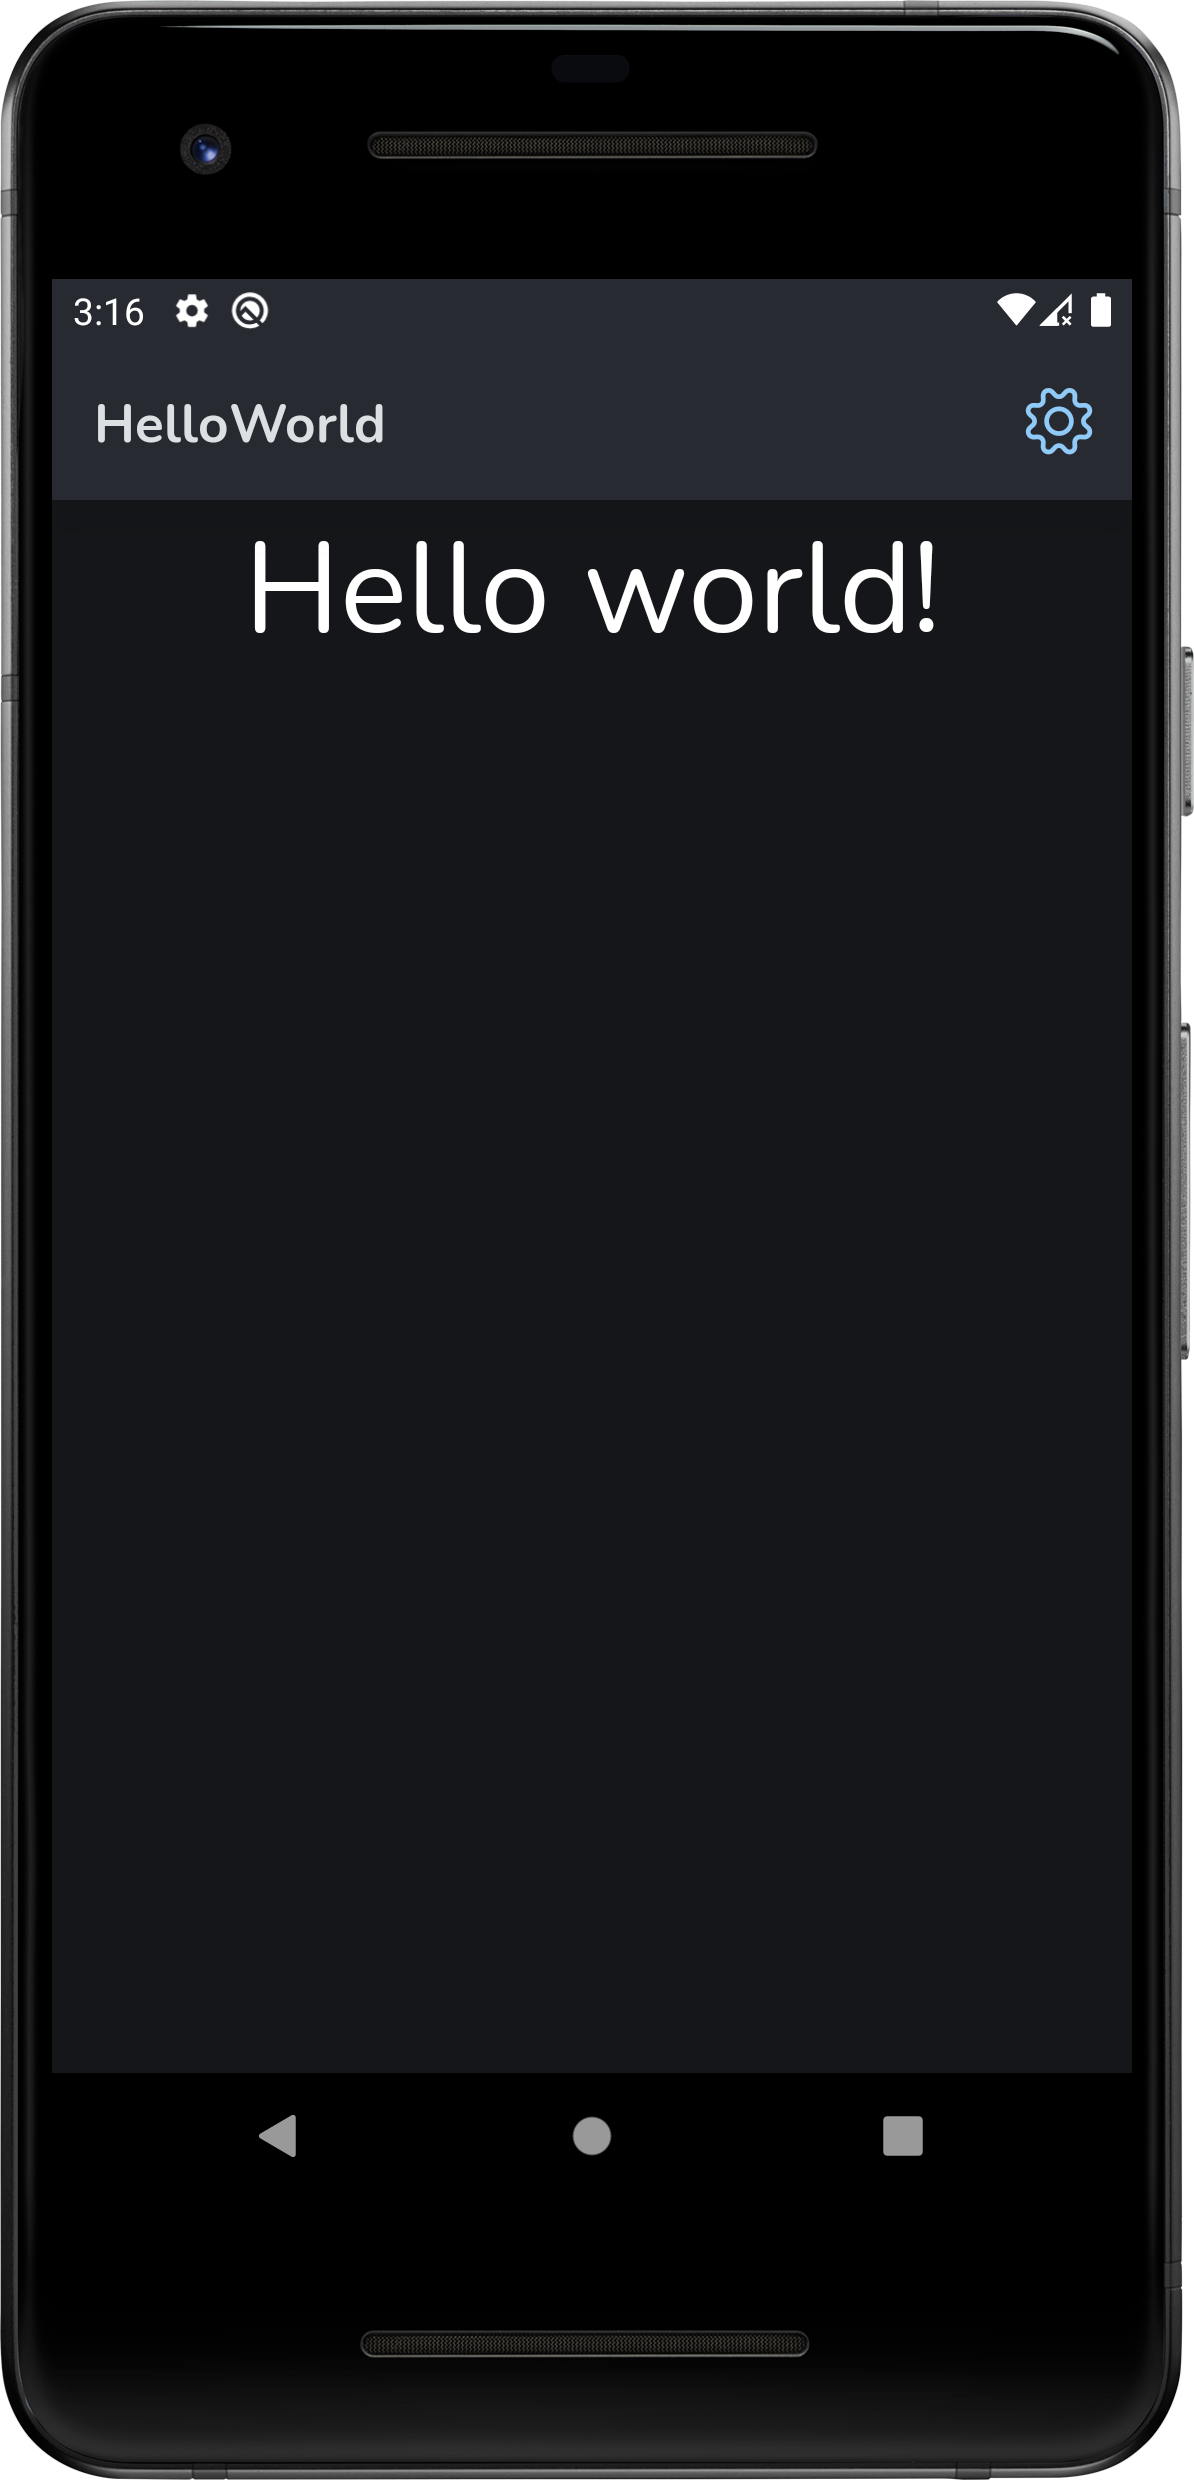 The result in **mobile** with **dark** theme